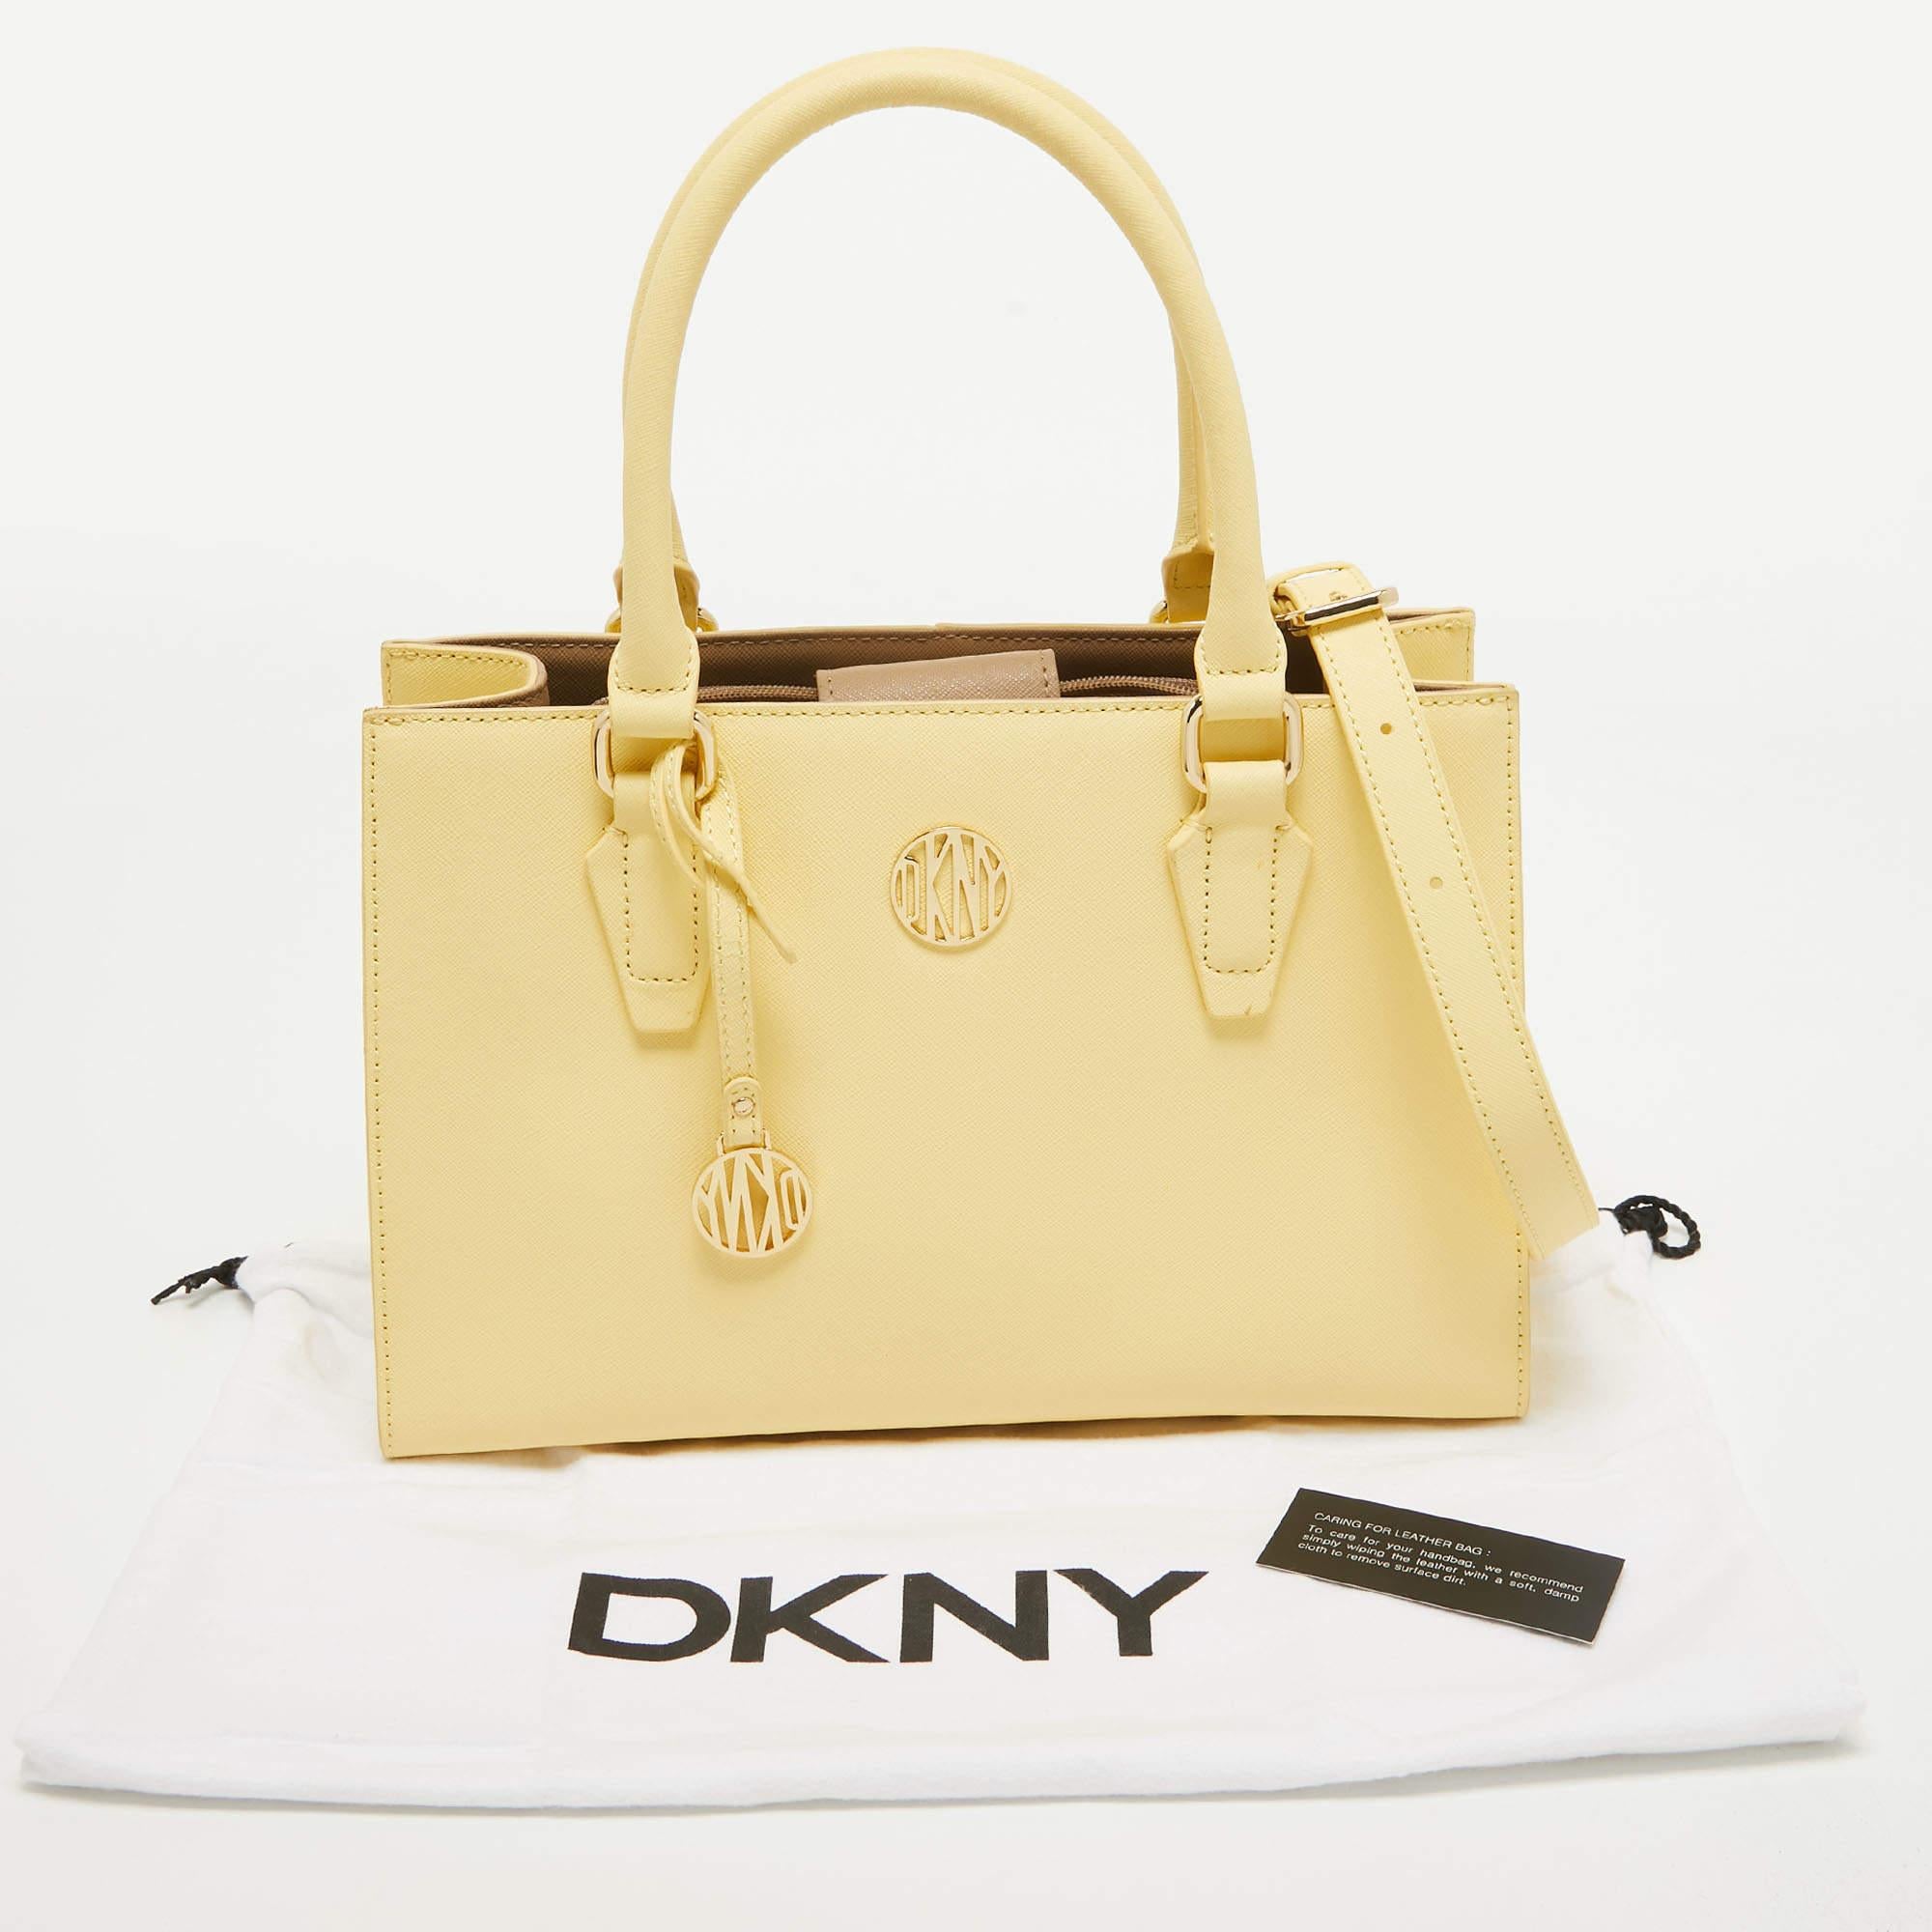 Dkny Yellow Leather Tote 8